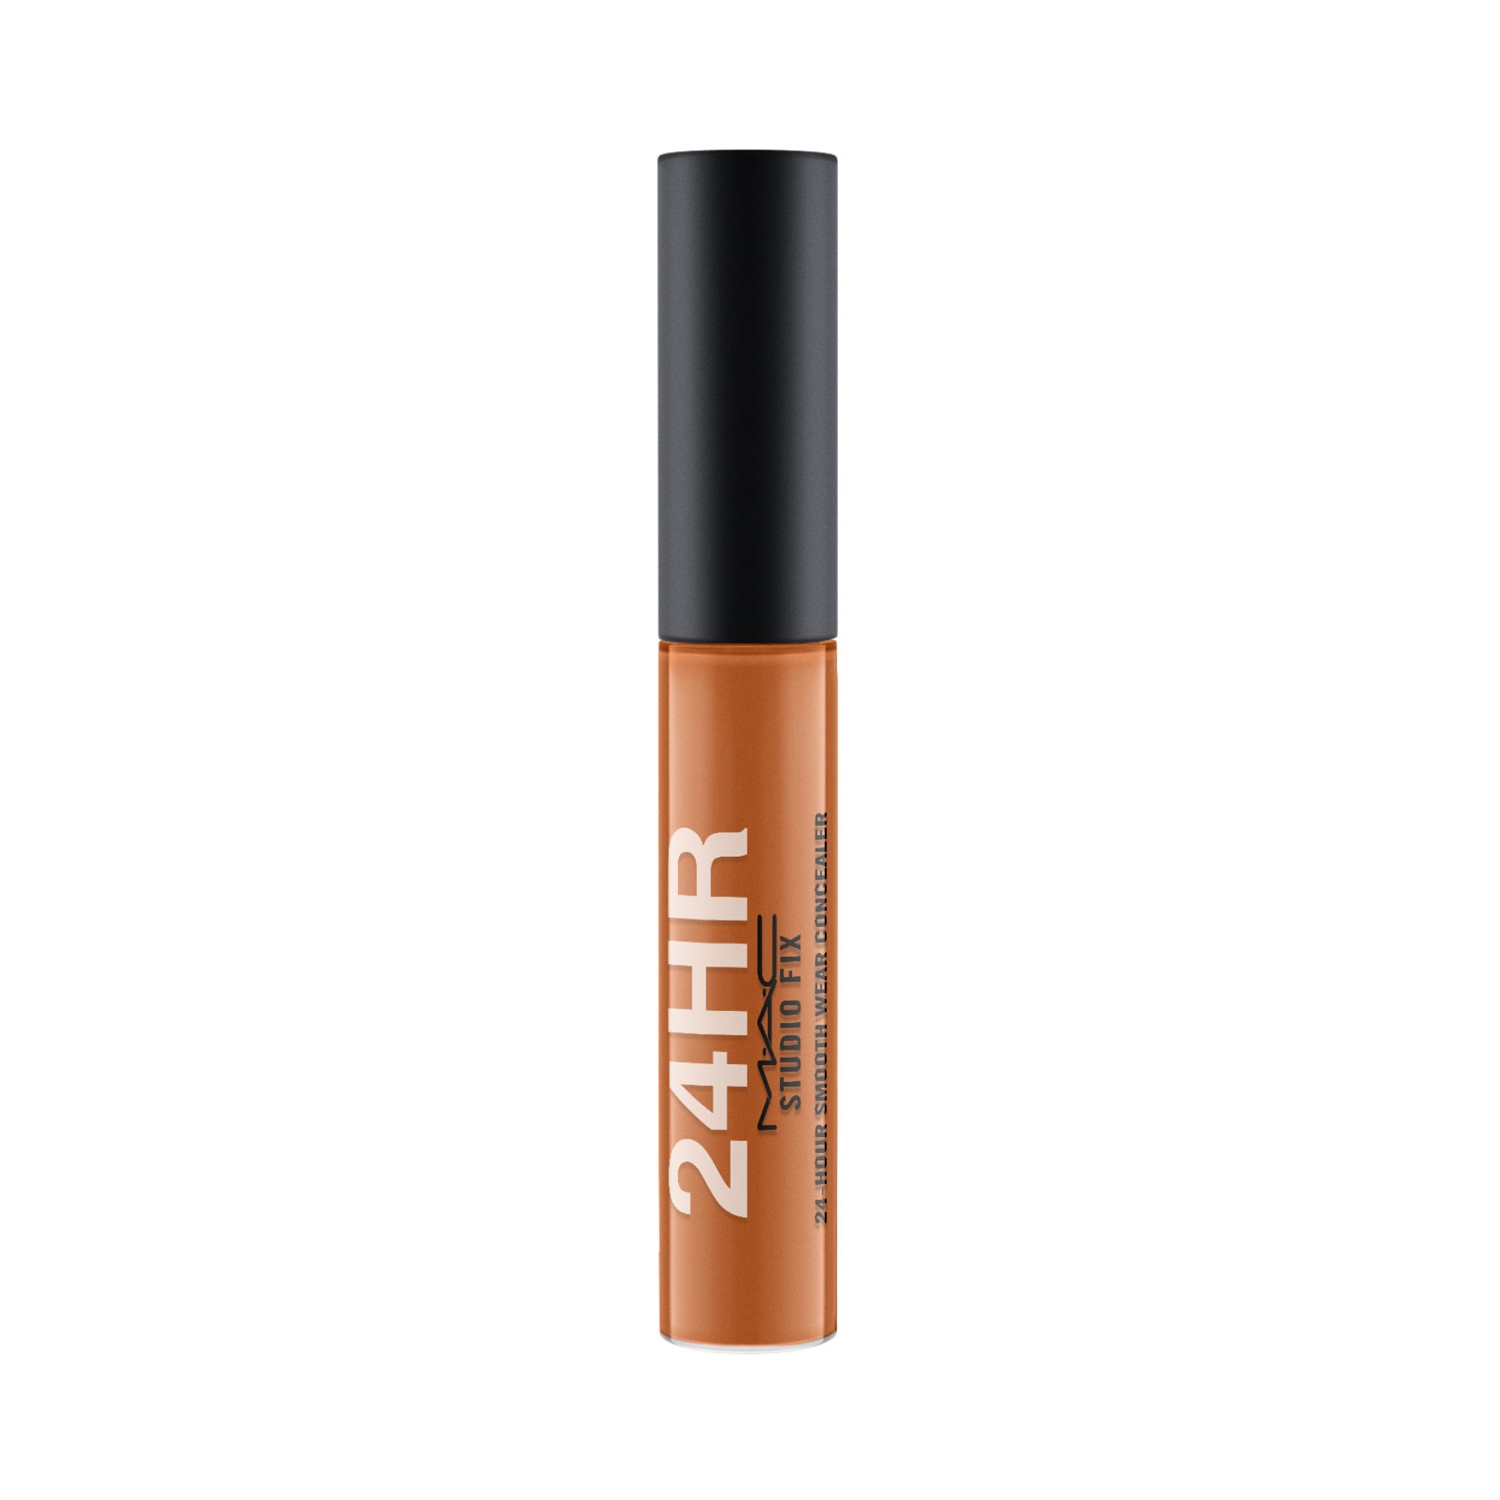 M.A.C | M.A.C Studio Fix 24-Hour Smooth Wear Concealer - NW50 (7ml)